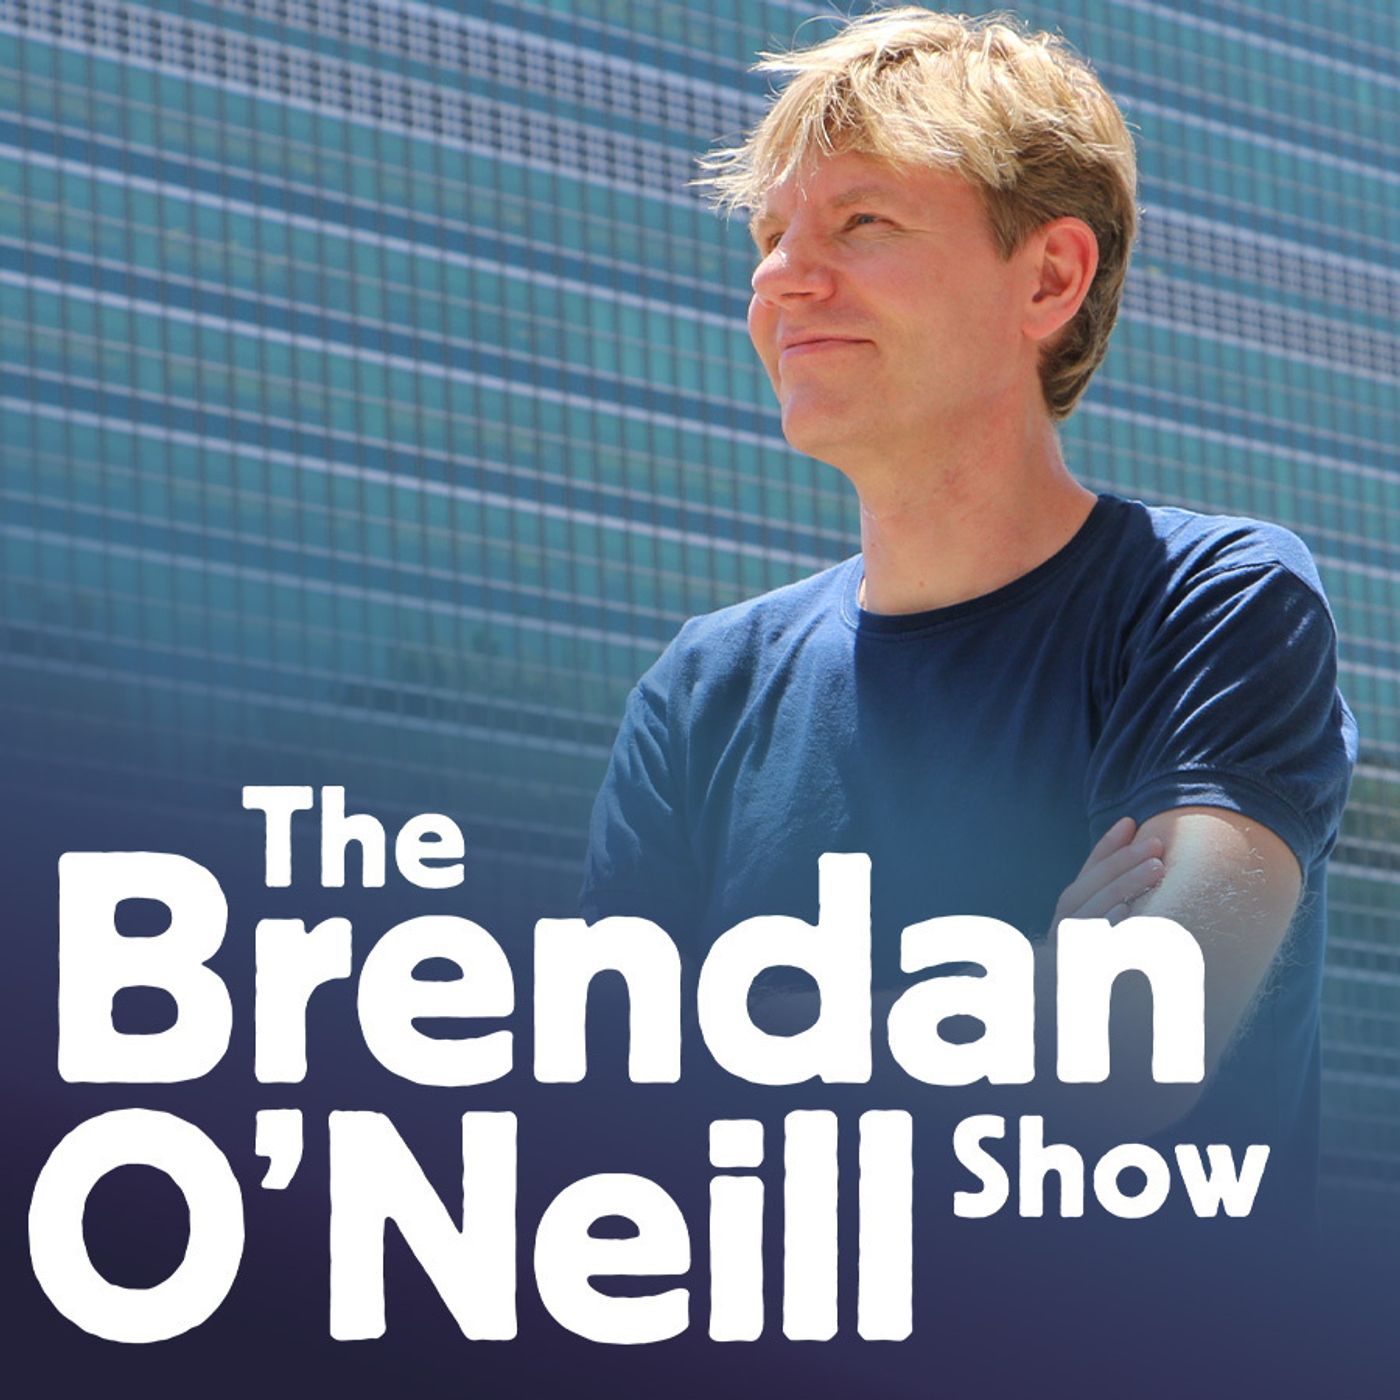 70: The madness of Net Zero, with Bjorn Lomborg